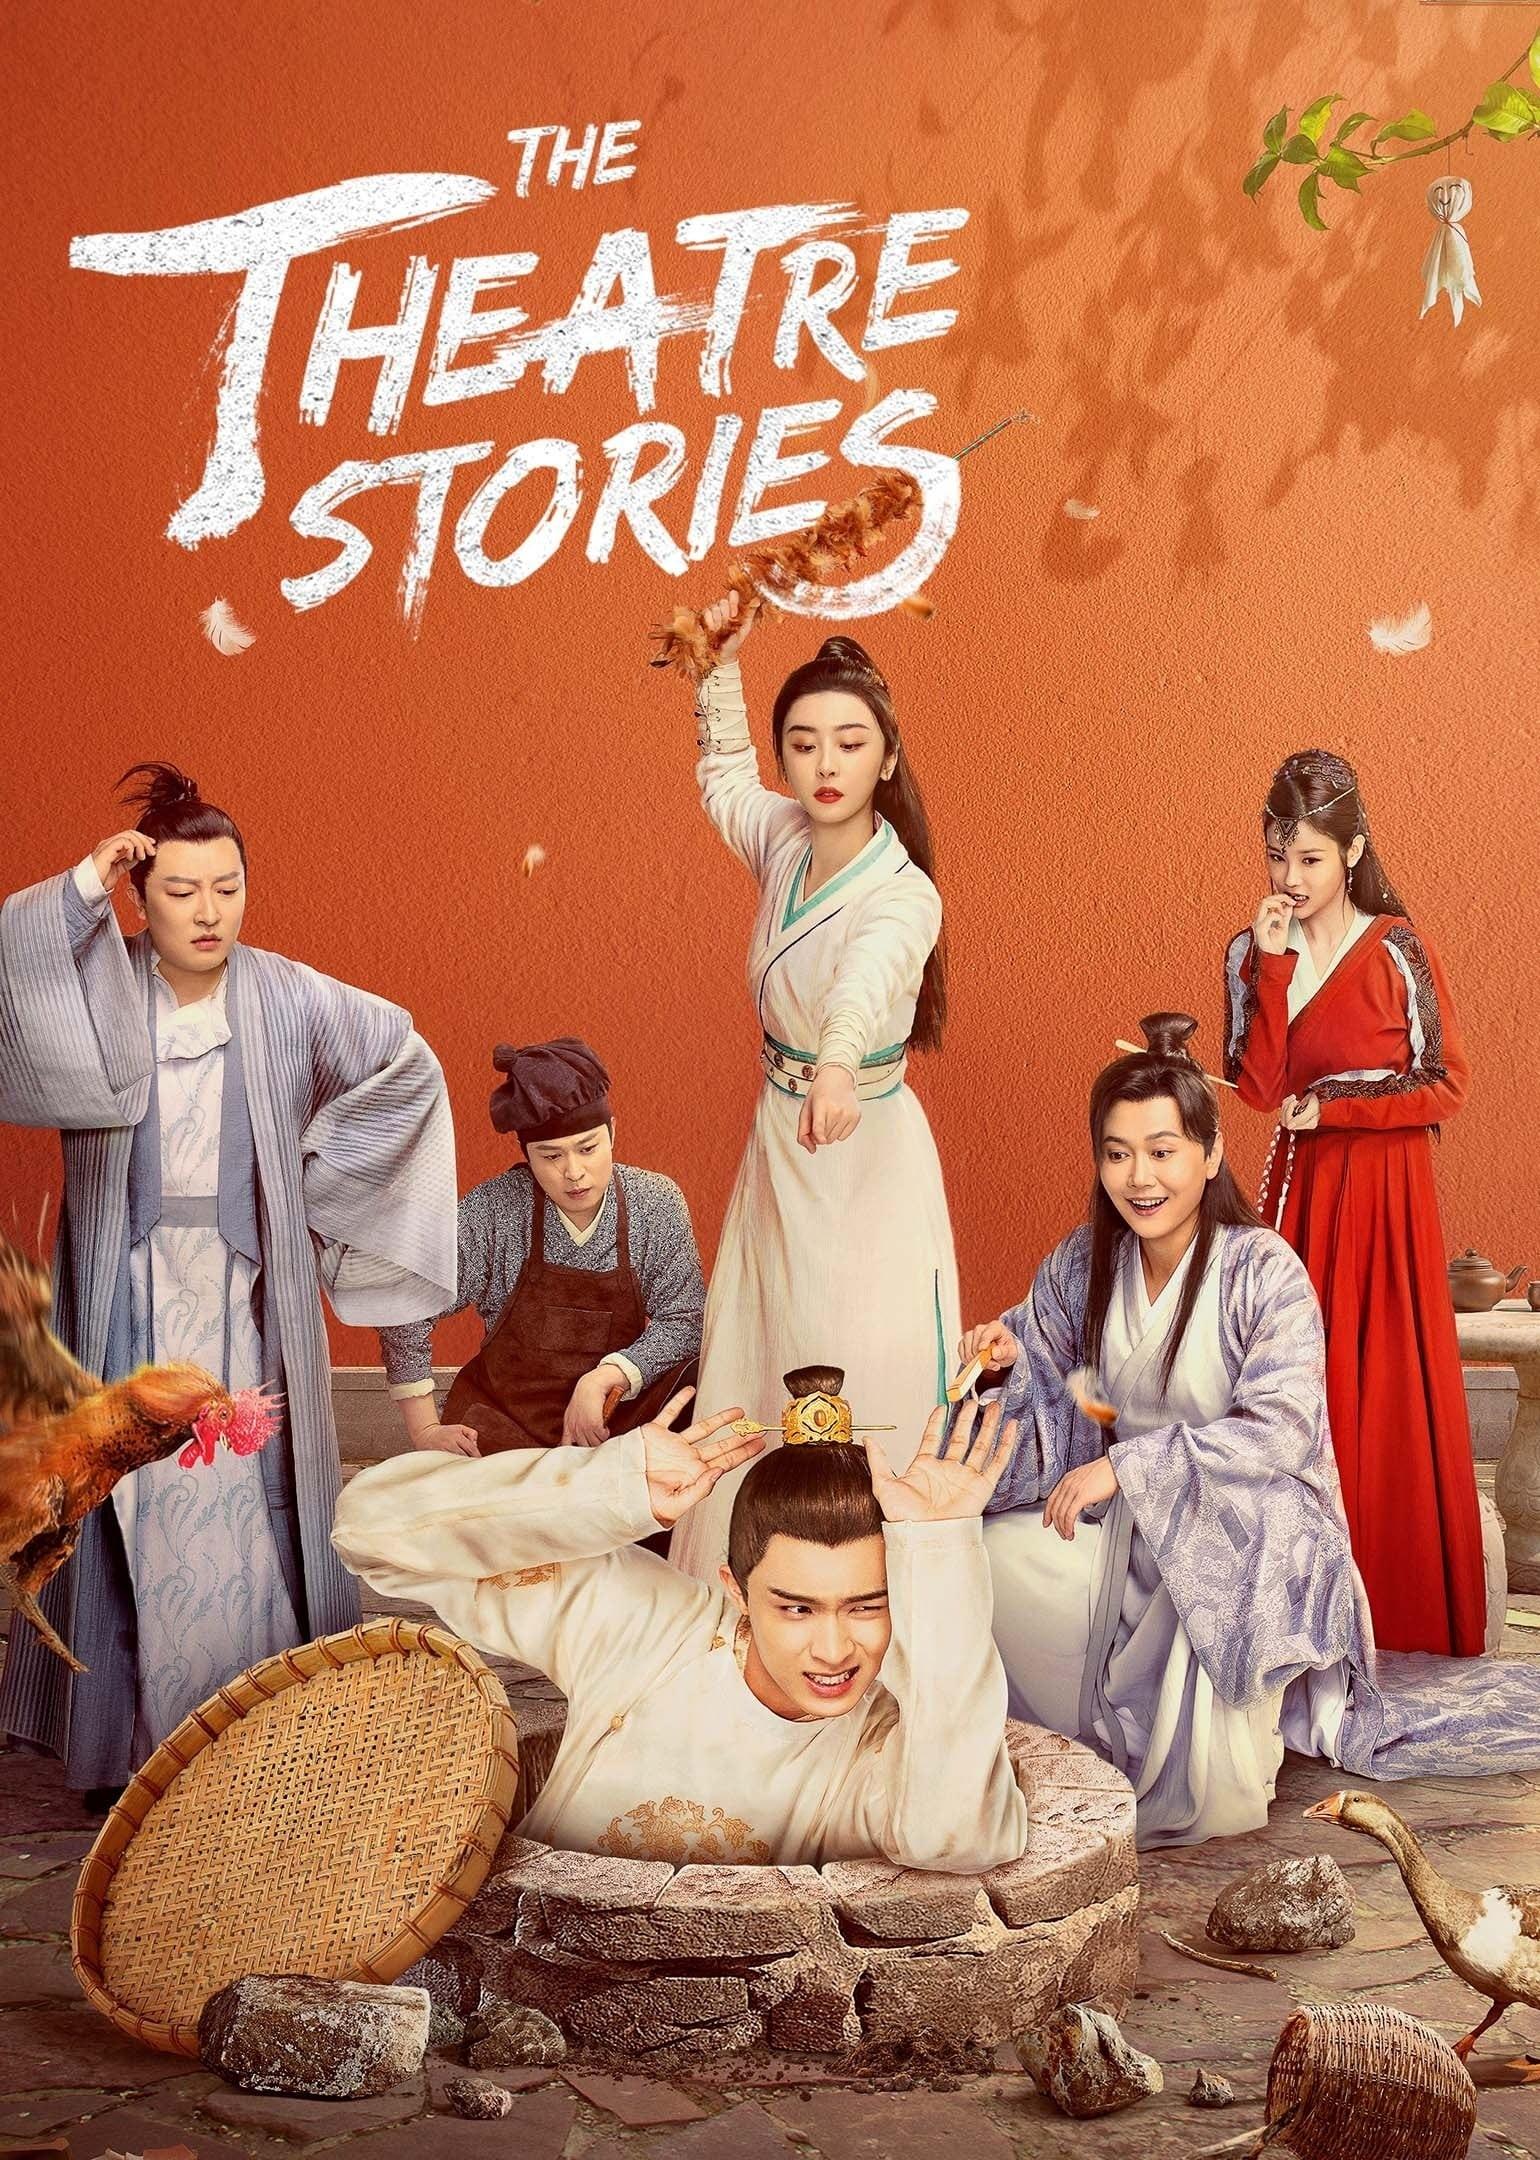 The Theatre Stories poster